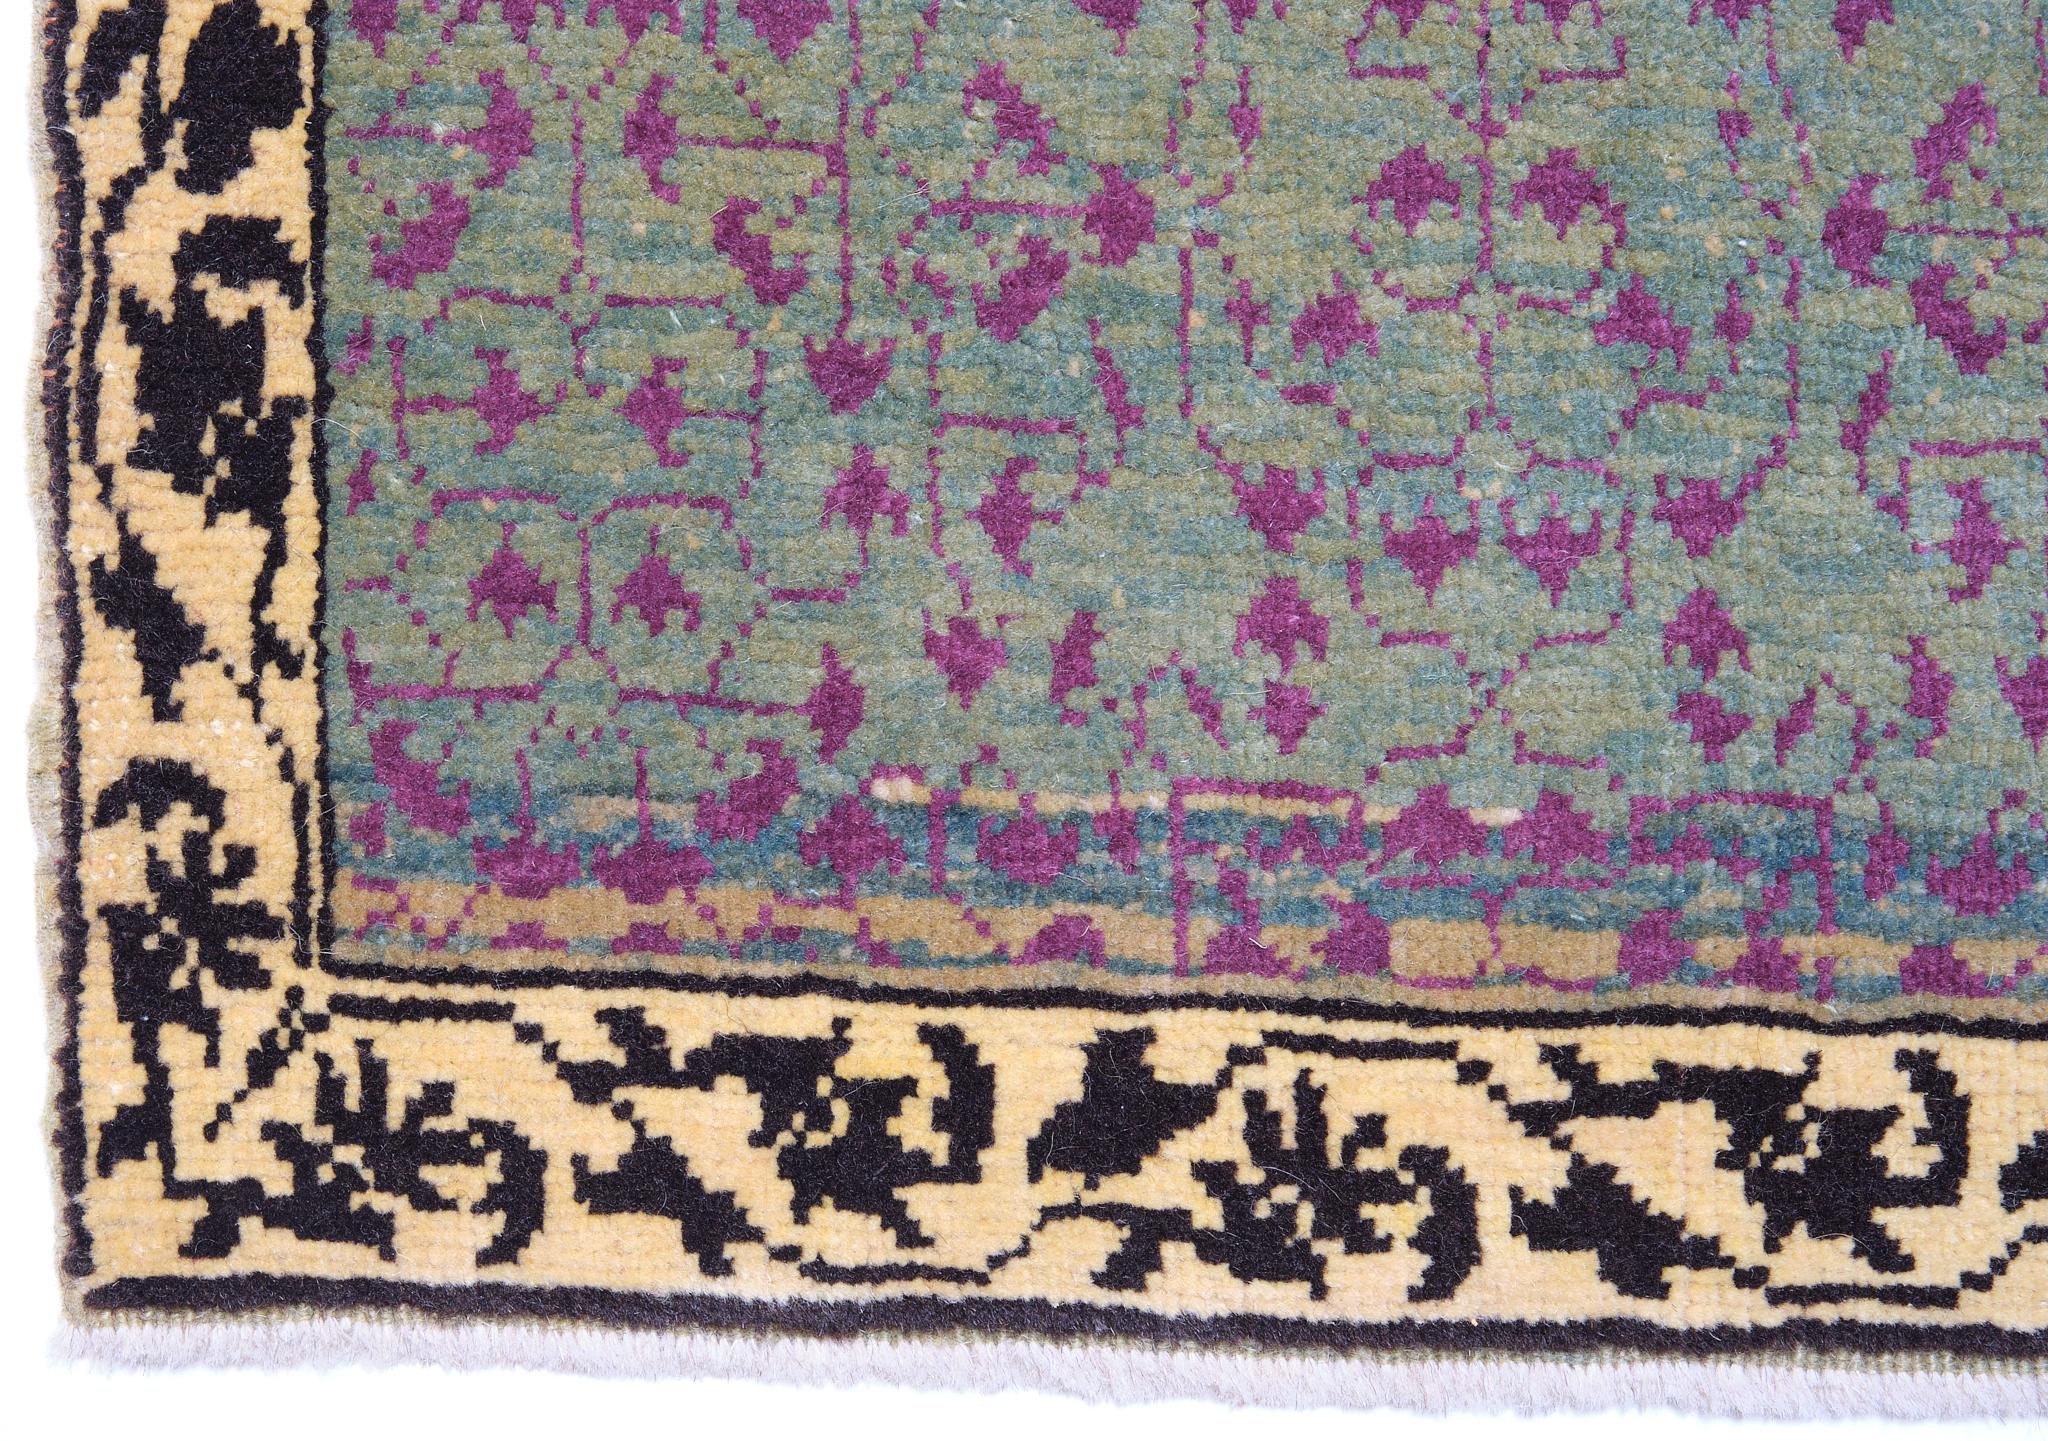 The source of carpet comes from the book Völker, Angela, Die orientalischen Knüpfteppiche das MAK, Vienna: Böhlau, 2001: 42–5. That rug with the central star was designed in the early 16th-century rug by Mamluk Sultane of Cairo, Egypt. It is